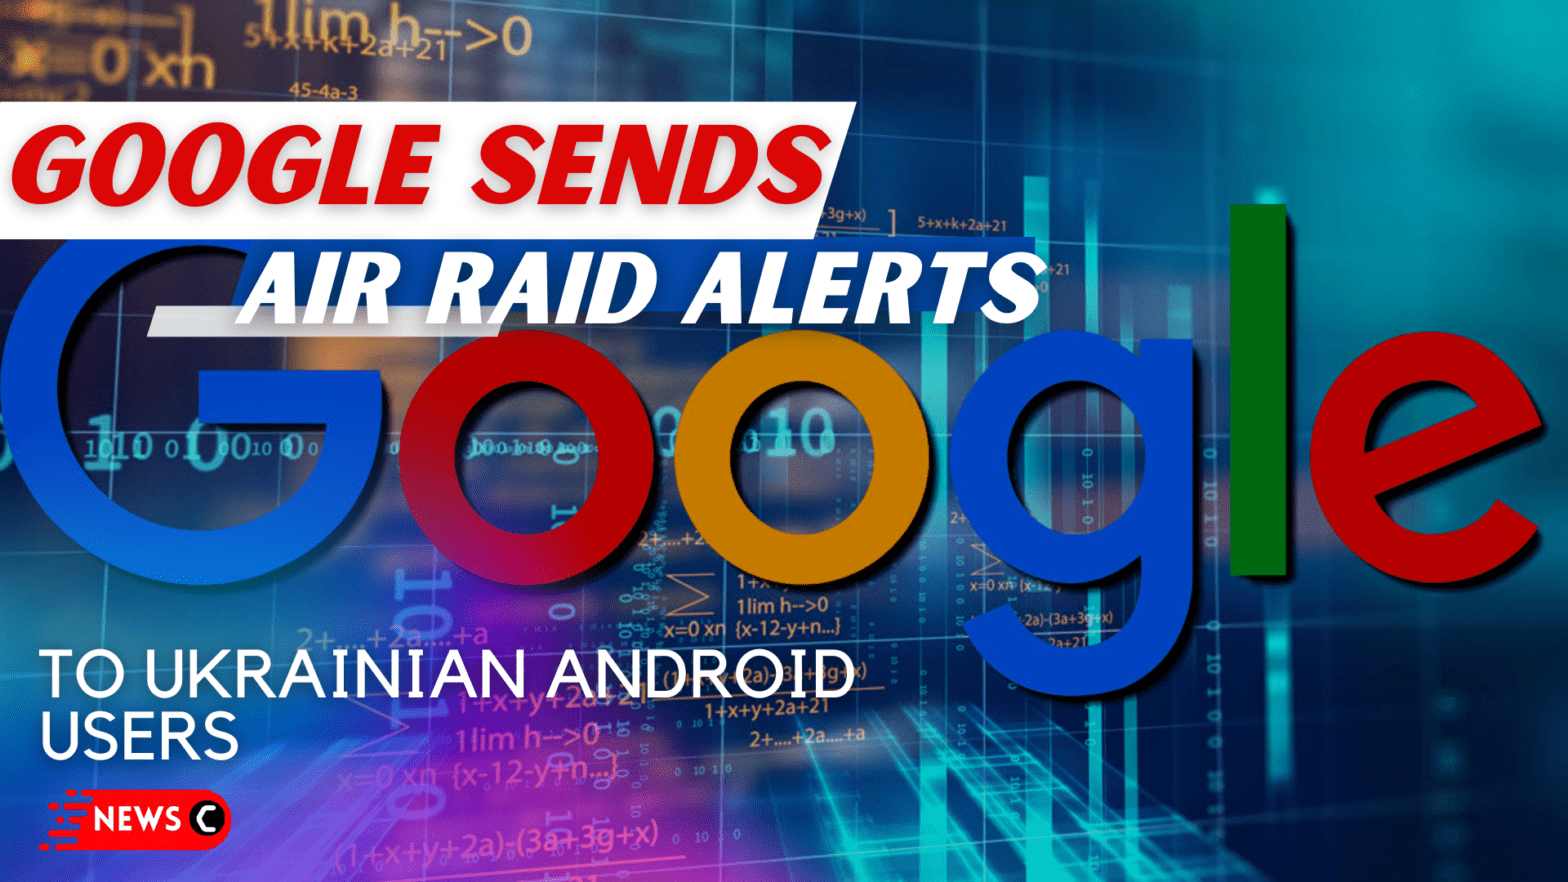 Google will send air raid alerts to Ukrainian Android users